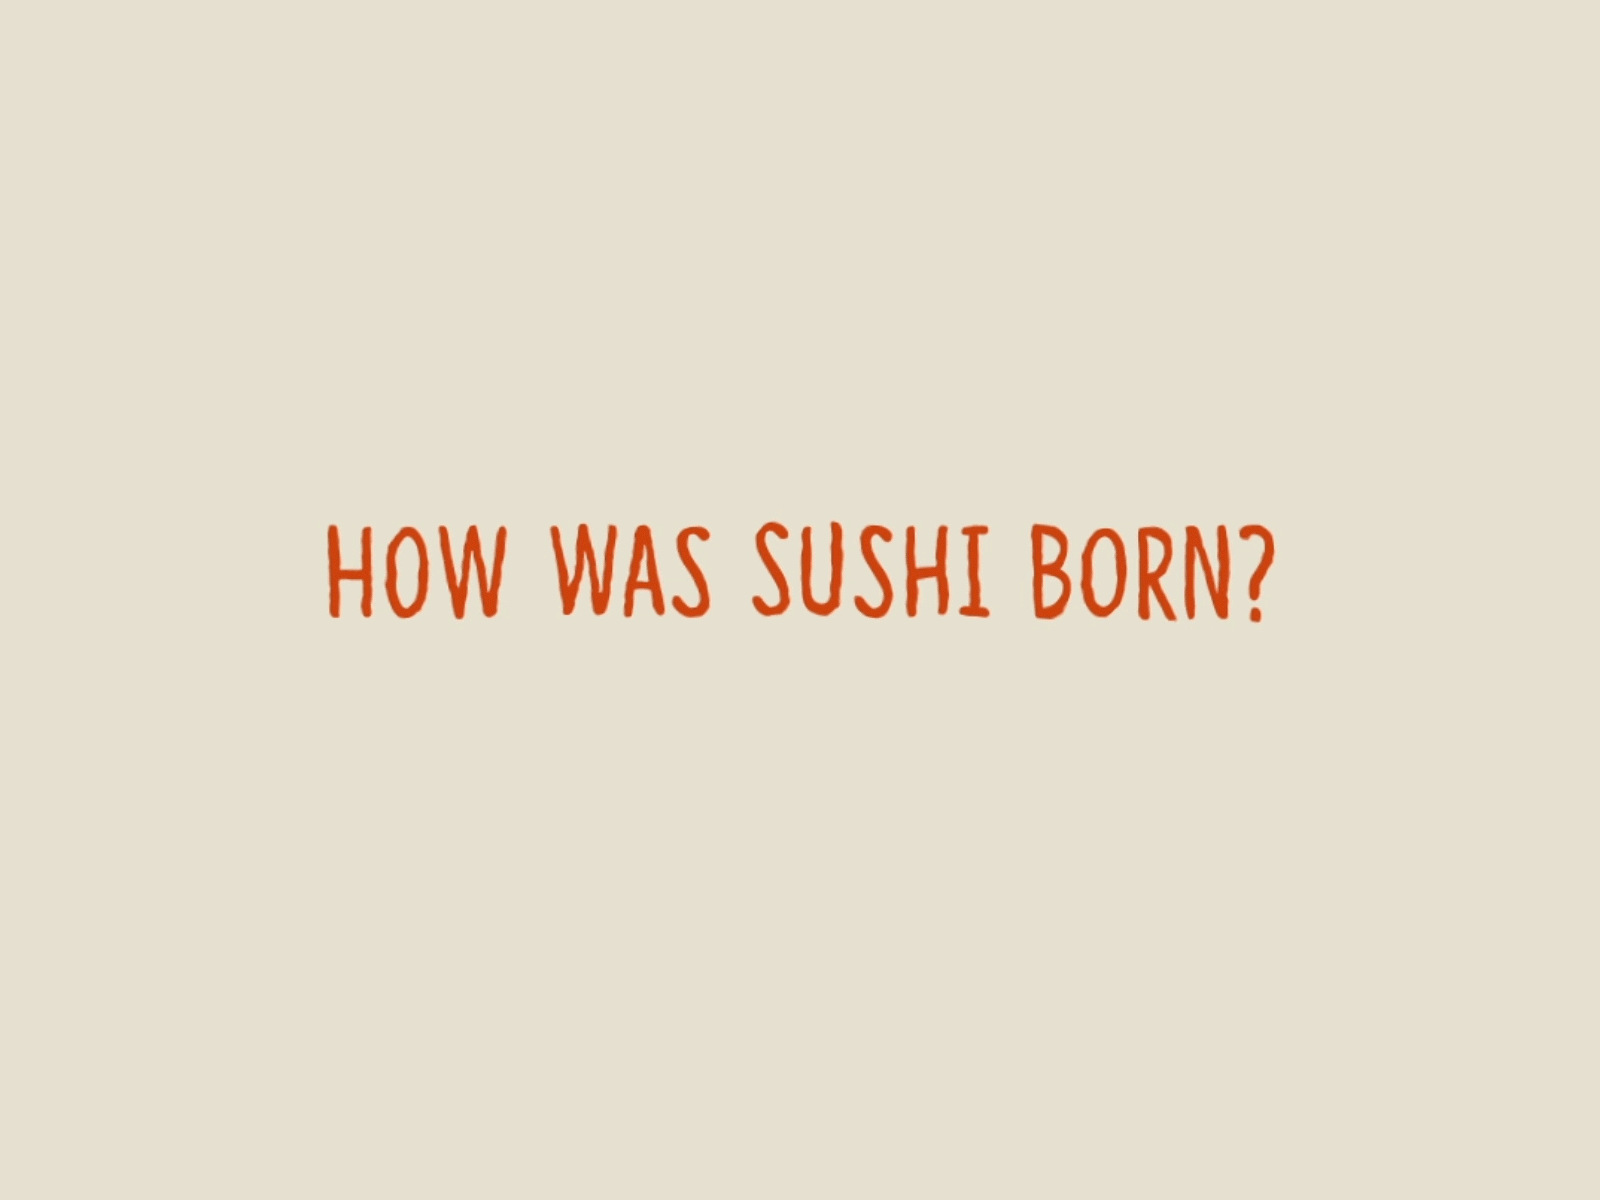 How was sushi born?